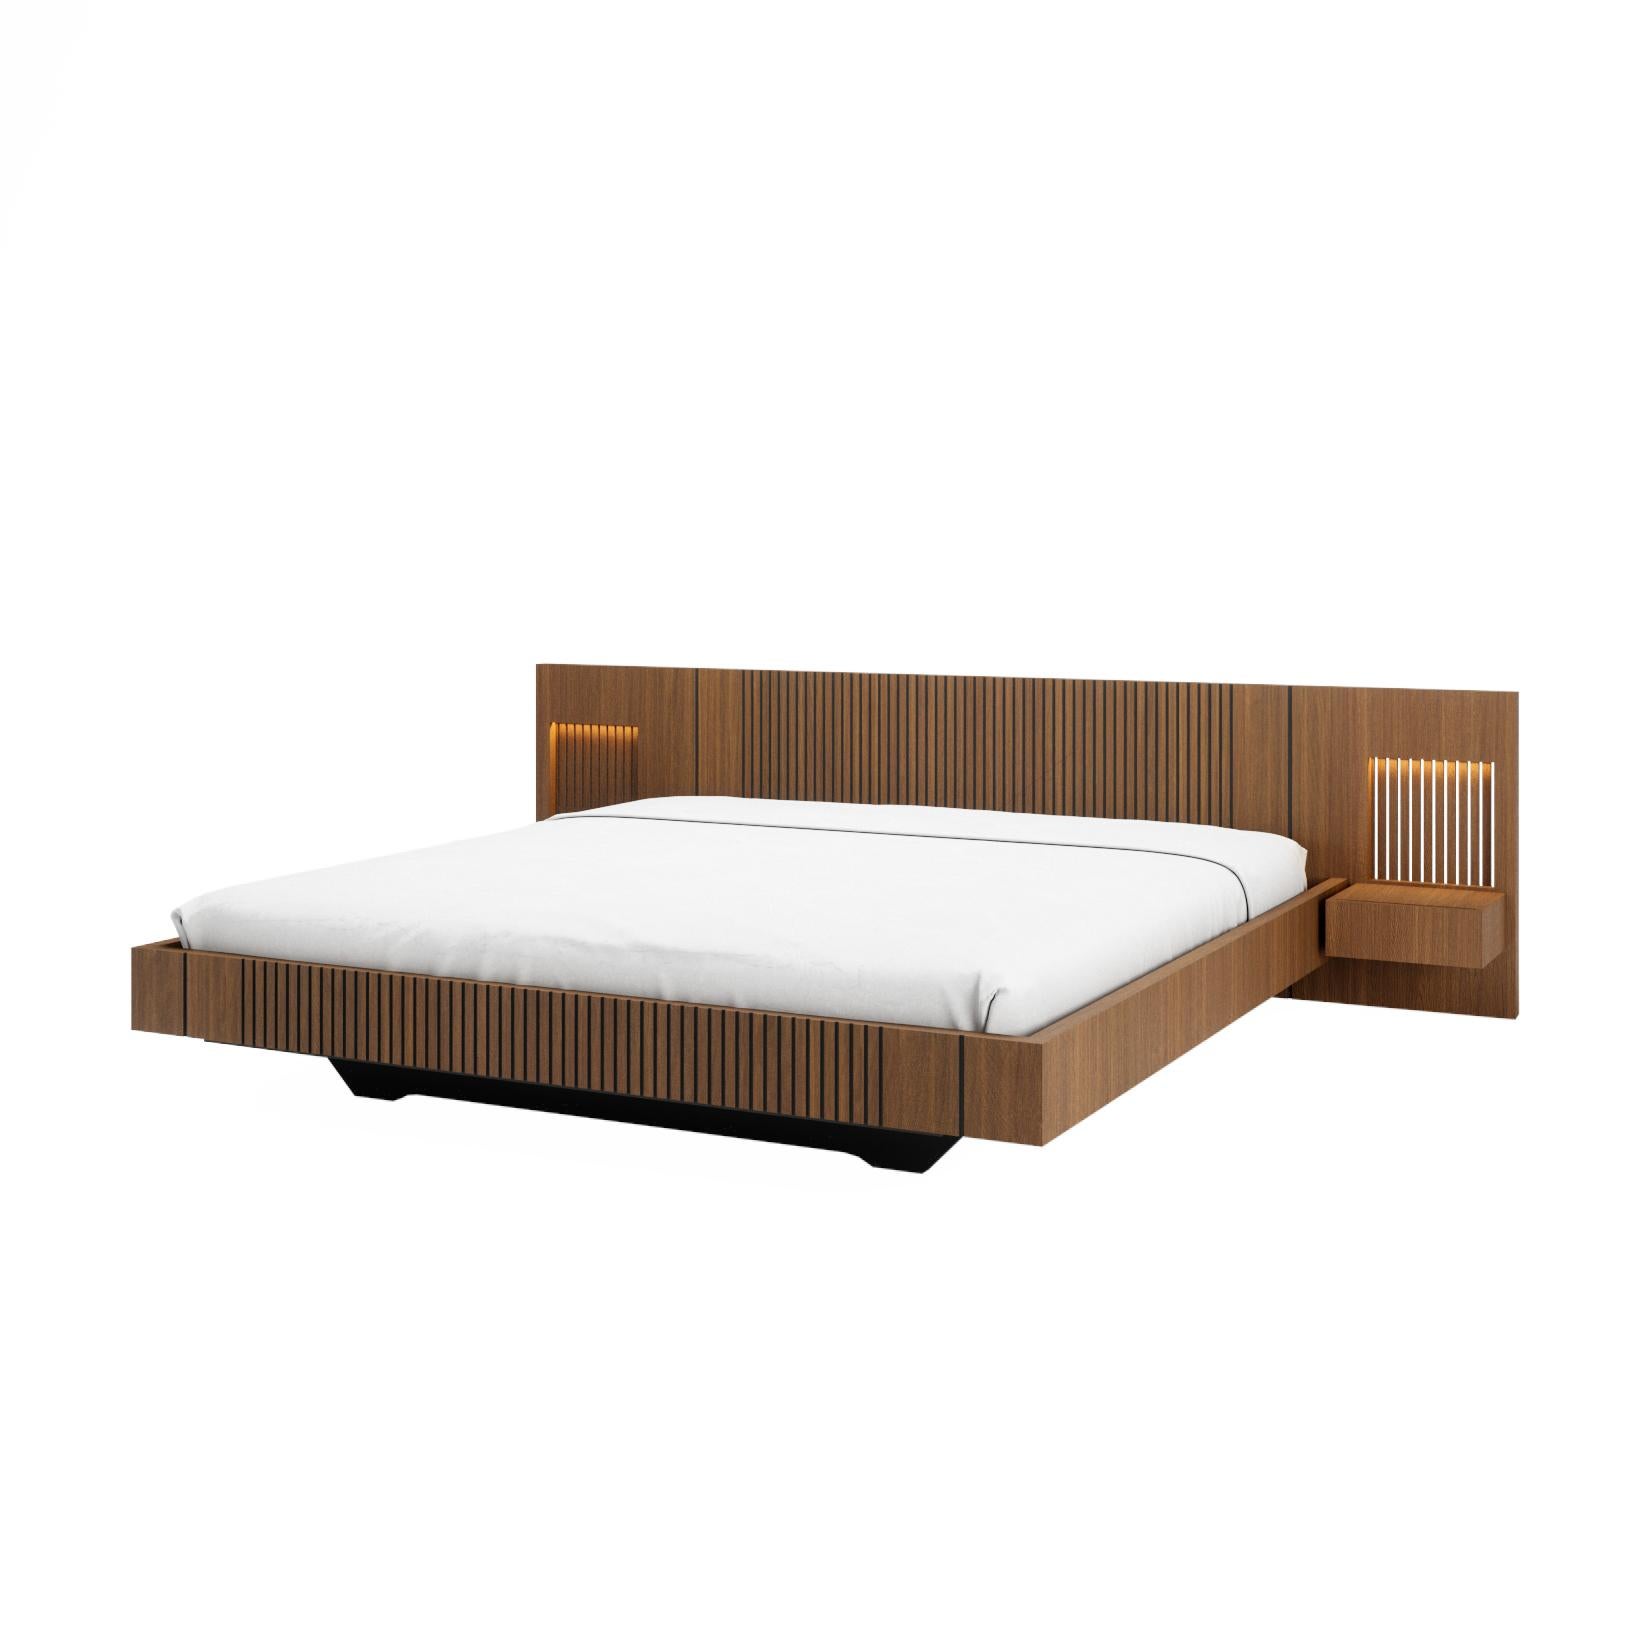 Scandinavian Modern Piana 213cm Size Bed with 2 Drawers and Leds on Bed Head For Sale